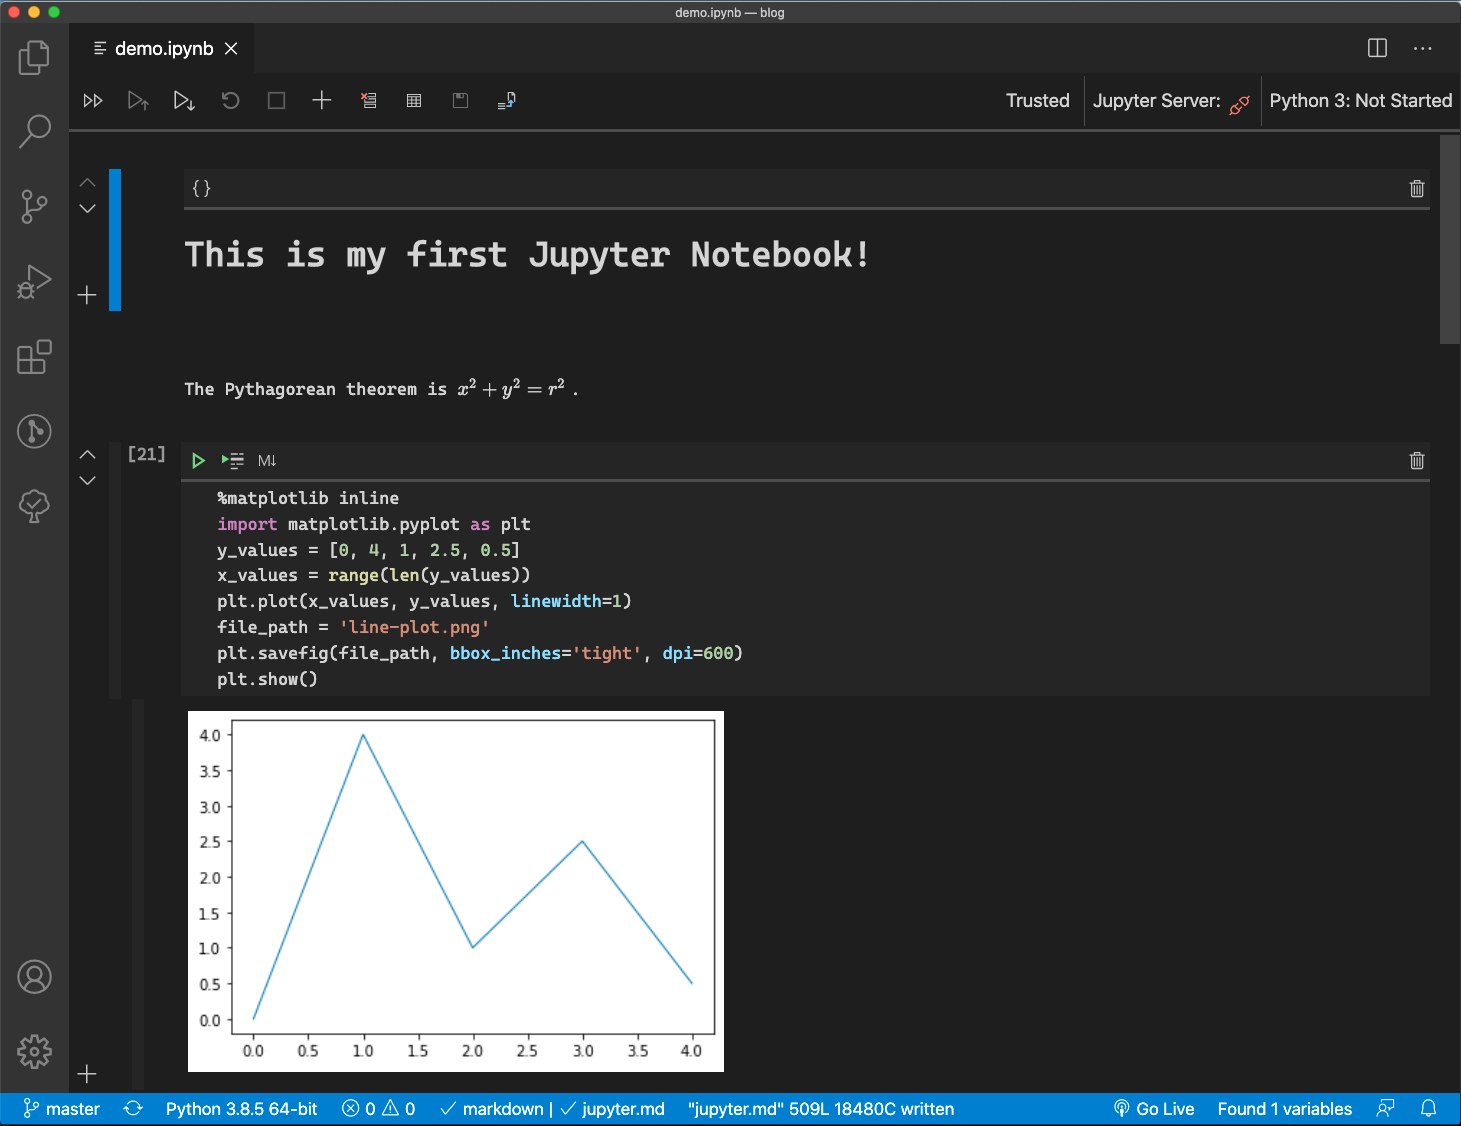 VS Code with Jupyter